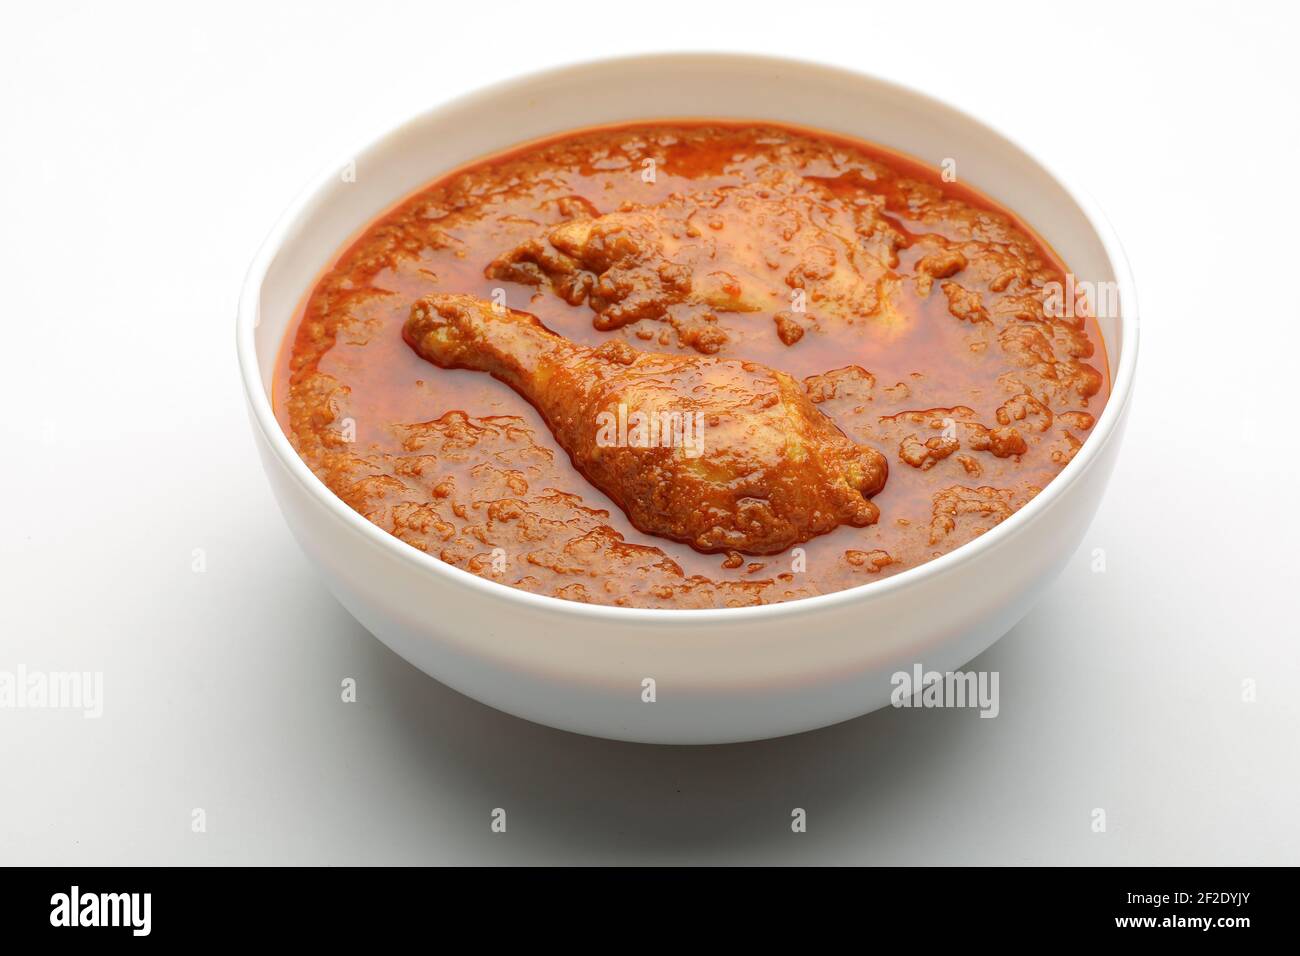 Chicken curry or masala , spicy chicken curry made using fried coconut in traditional way,arranged in a white ceramic bowl with white background,isola Stock Photo